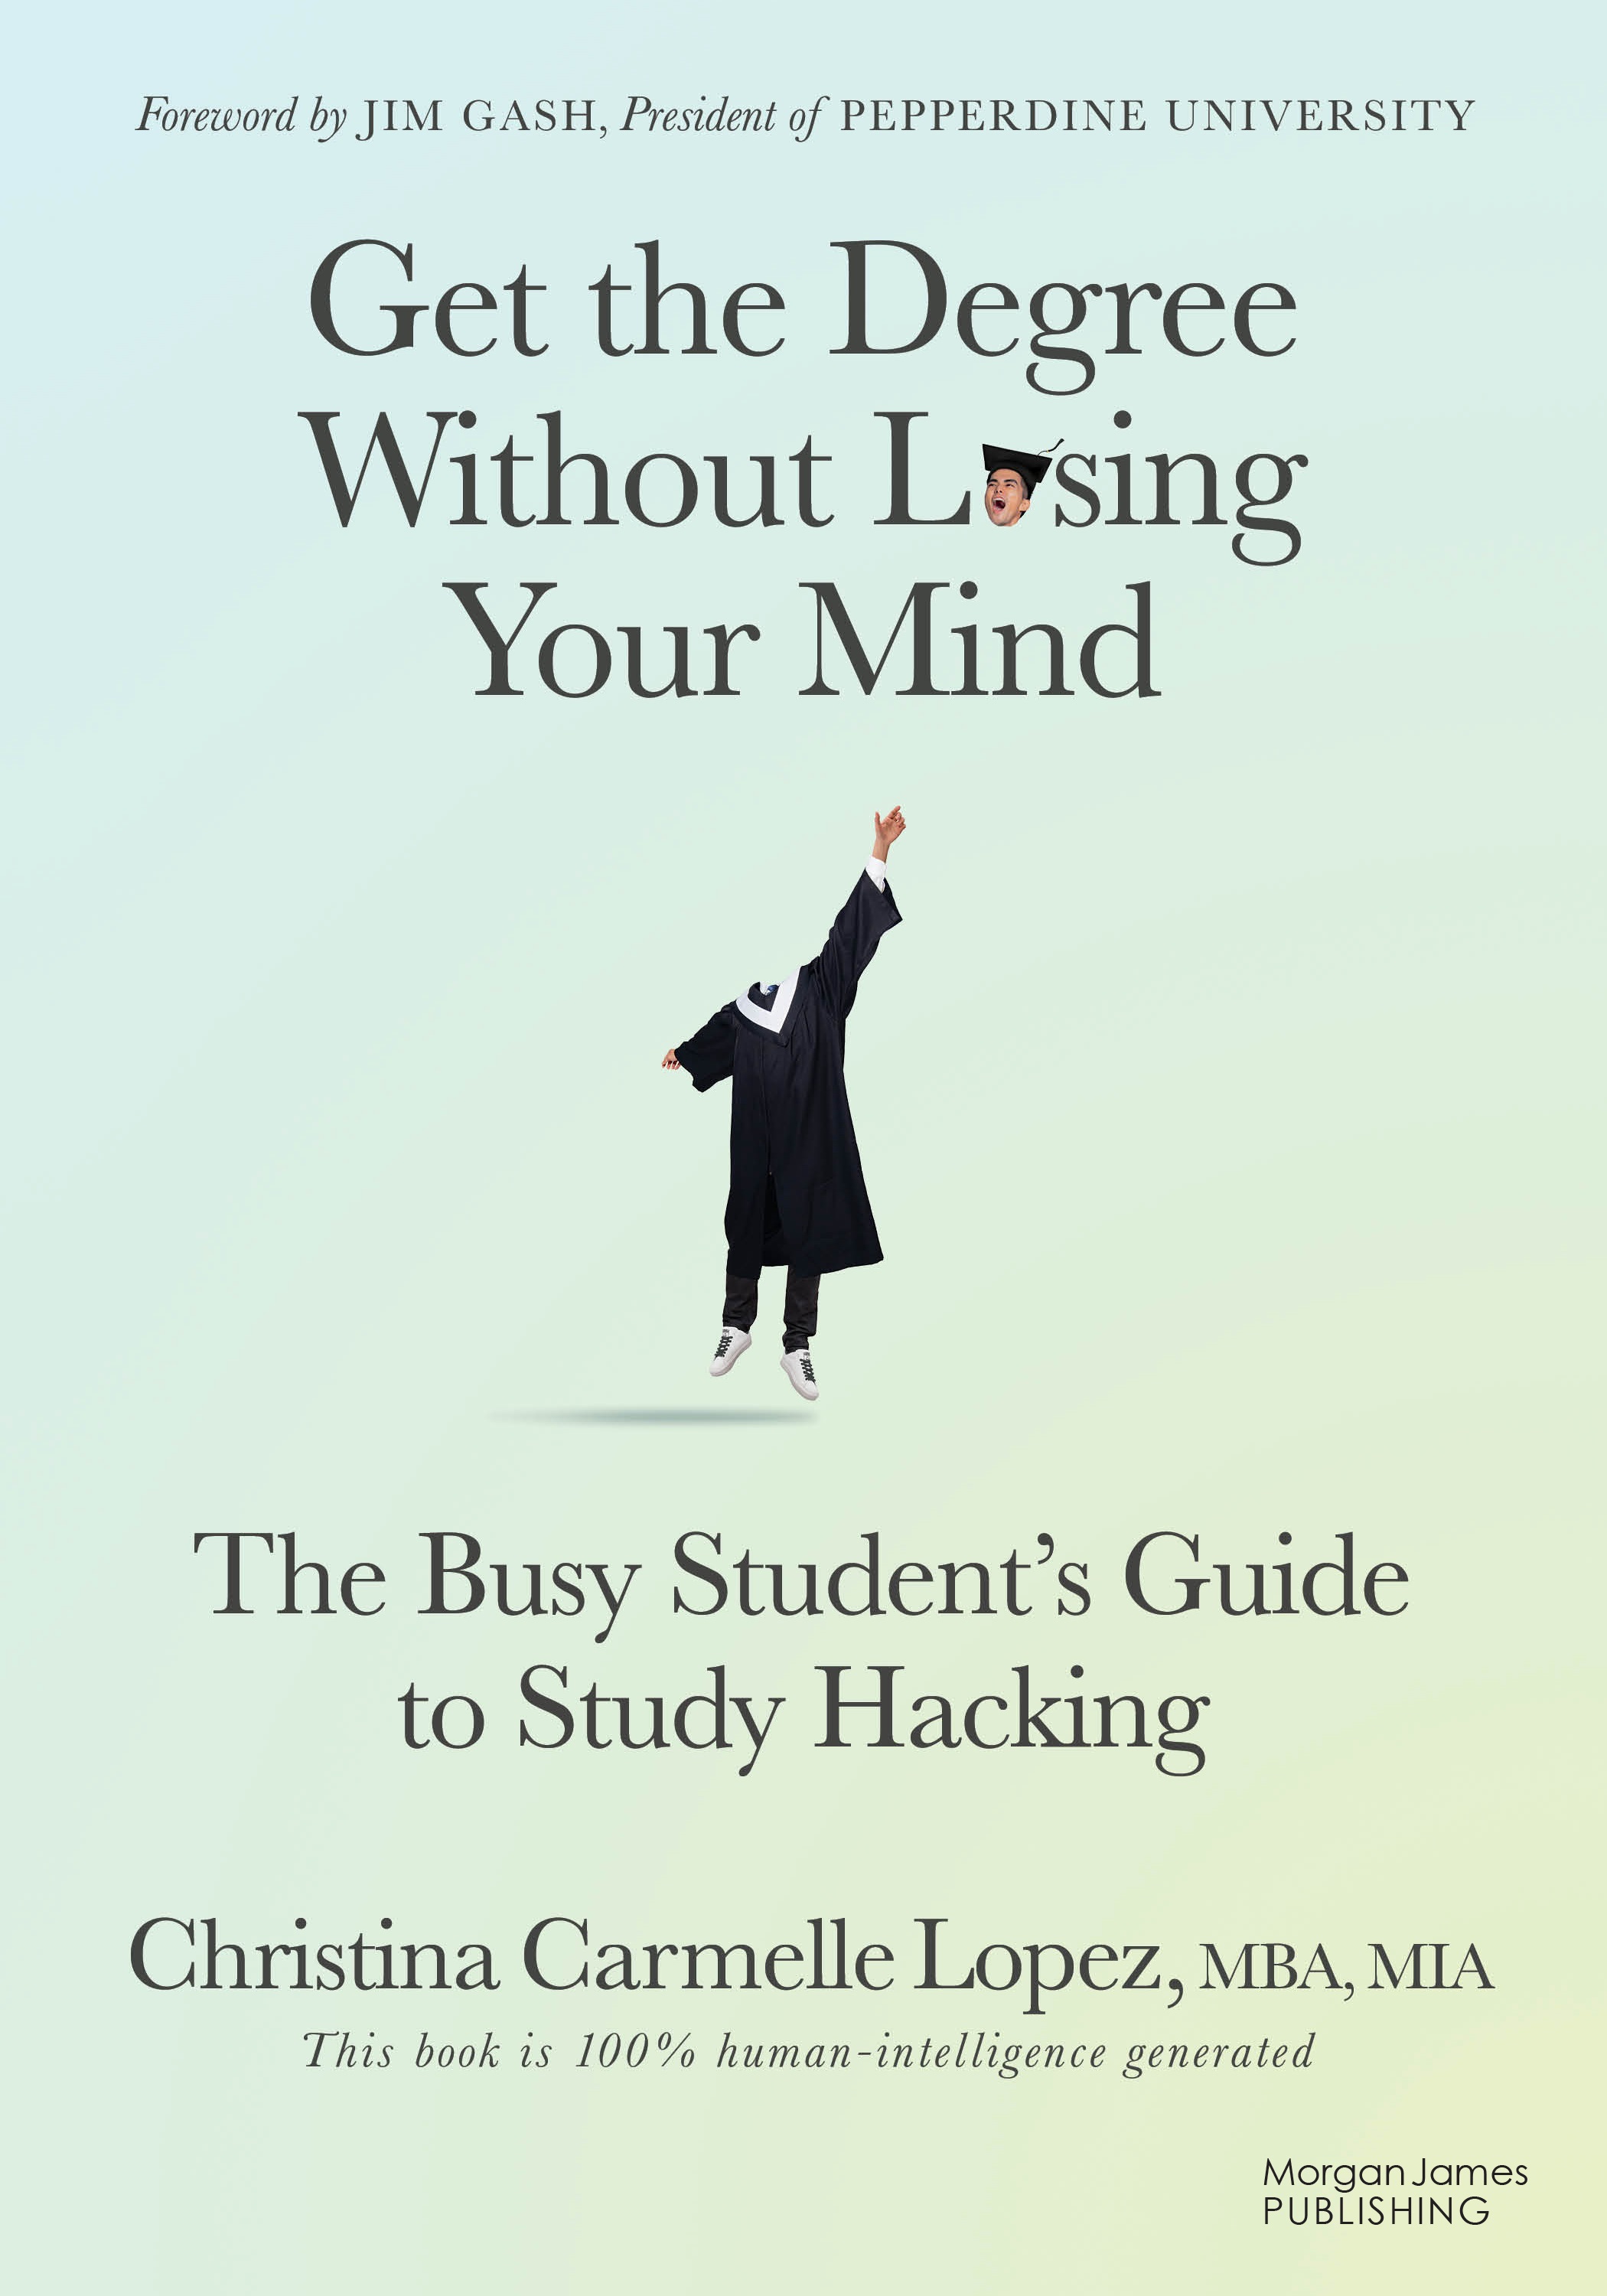 Former U.S. Diplomat Shares Tips for Personal Effectiveness and Brain-enhancing Hacks for Learners of All Ages in New Book